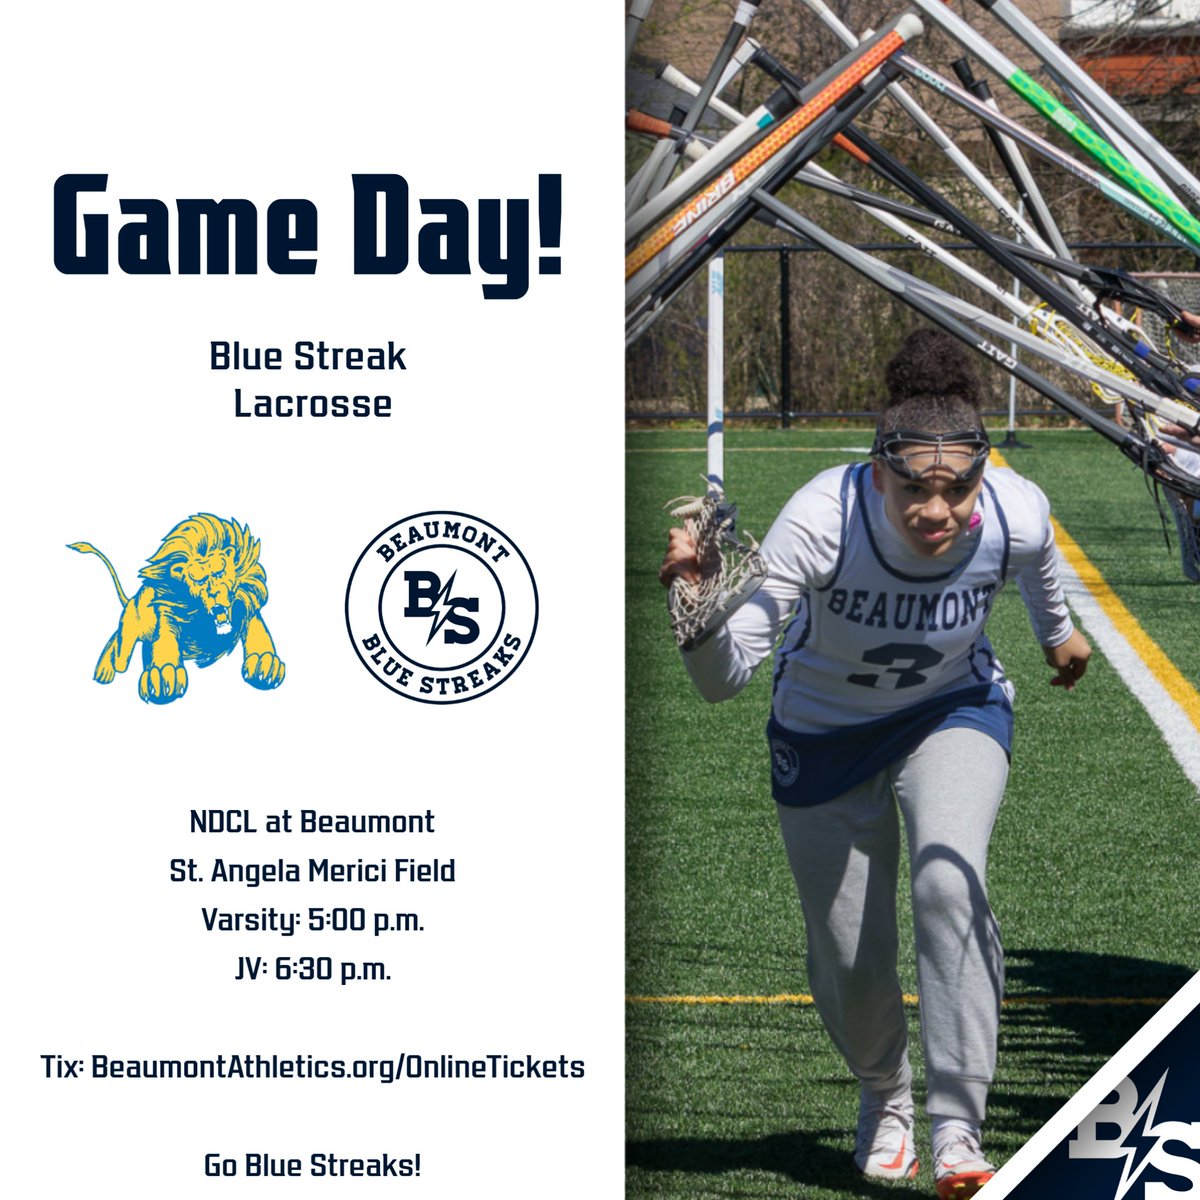 Our lacrosse program is resuming Crown Conference play tonight at home against Notre Dame-Cathedral Latin. Varsity is first at 5:00 p.m. with JV to follow at 6:30 p.m. Tix: BeaumontAthletics.org/OnlineTickets Go Blue Streaks!